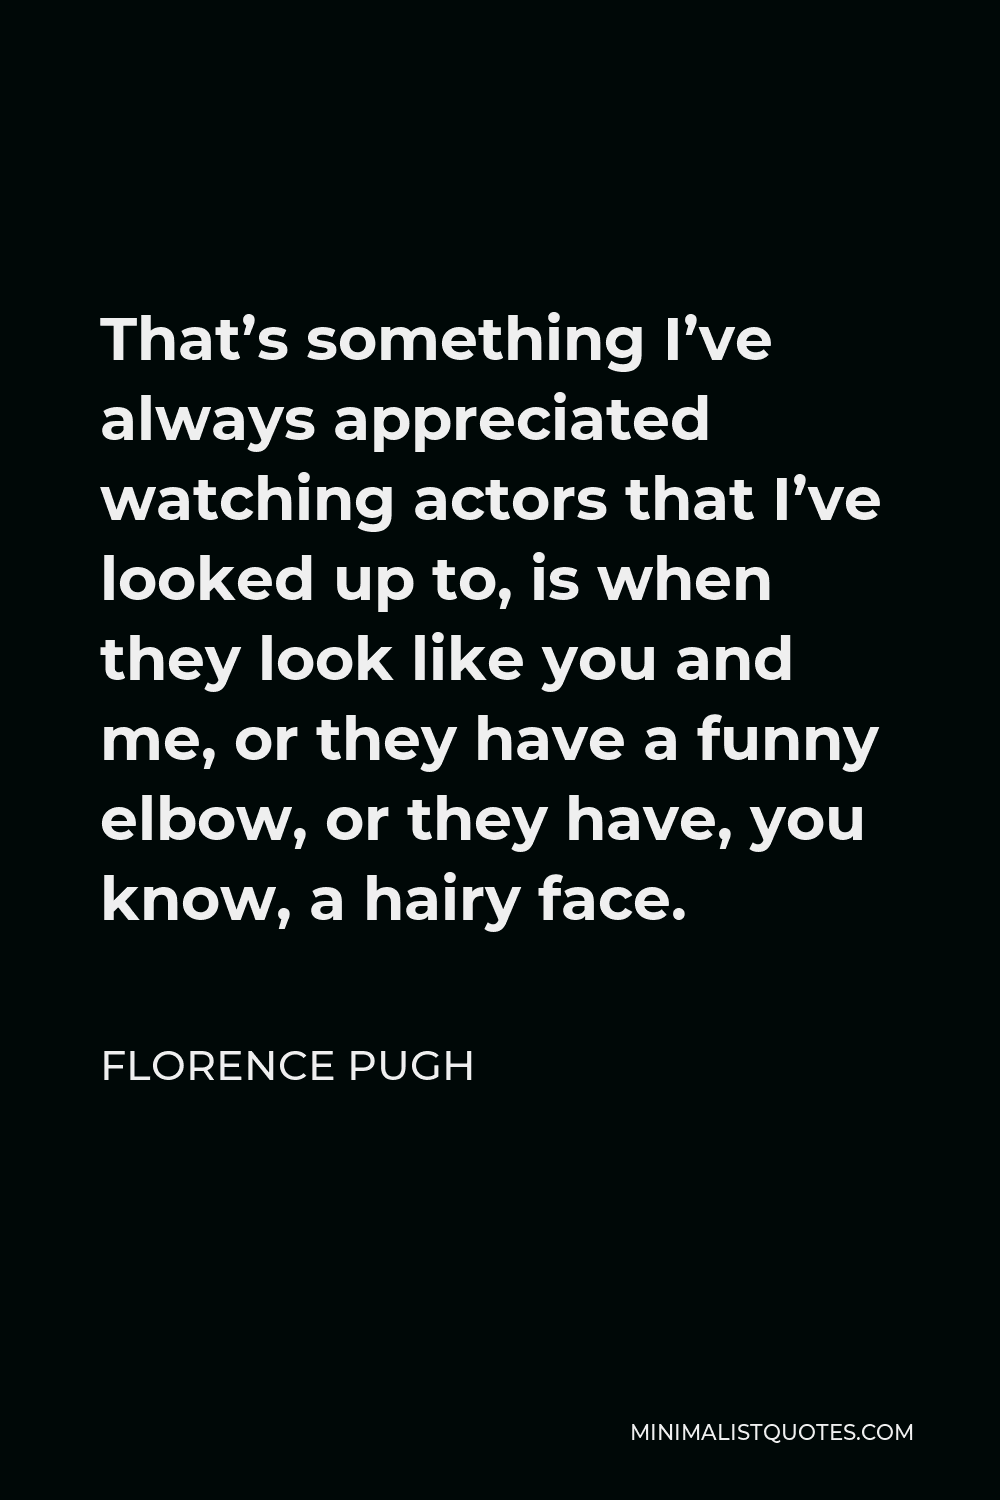 Florence Pugh Quote - That’s something I’ve always appreciated watching actors that I’ve looked up to, is when they look like you and me, or they have a funny elbow, or they have, you know, a hairy face.